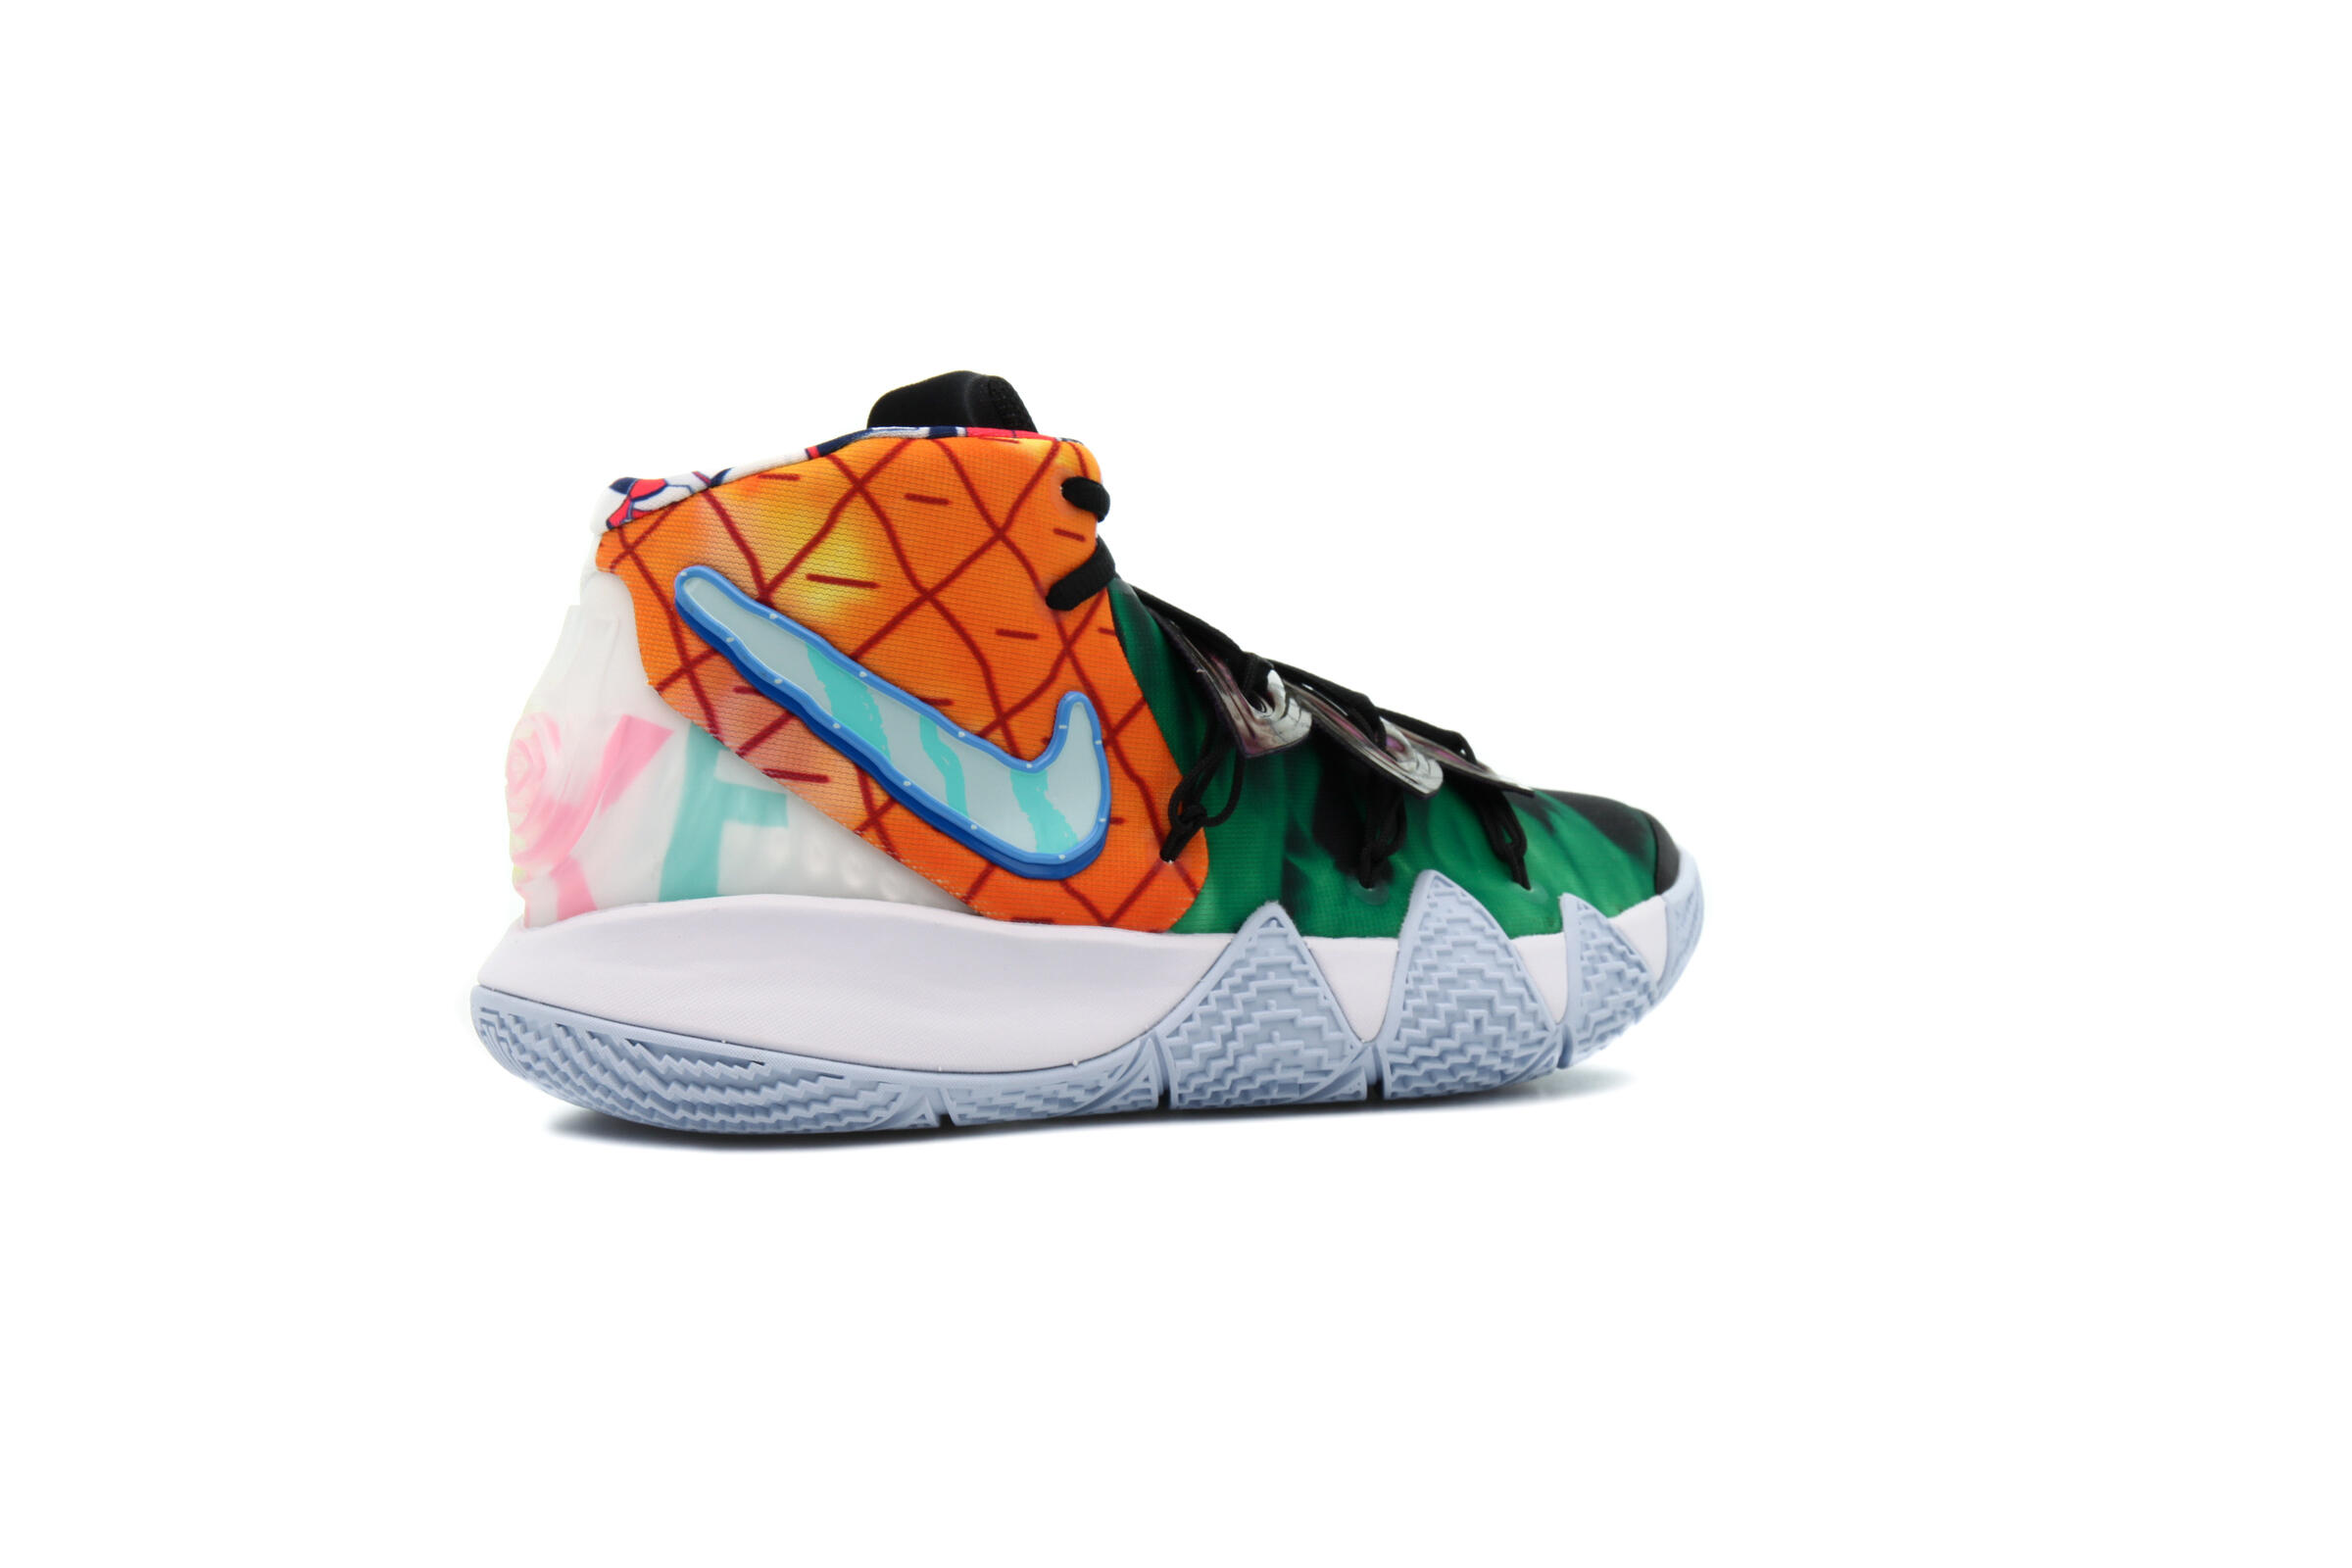 Nike KYBRID S2 "WHAT THE"